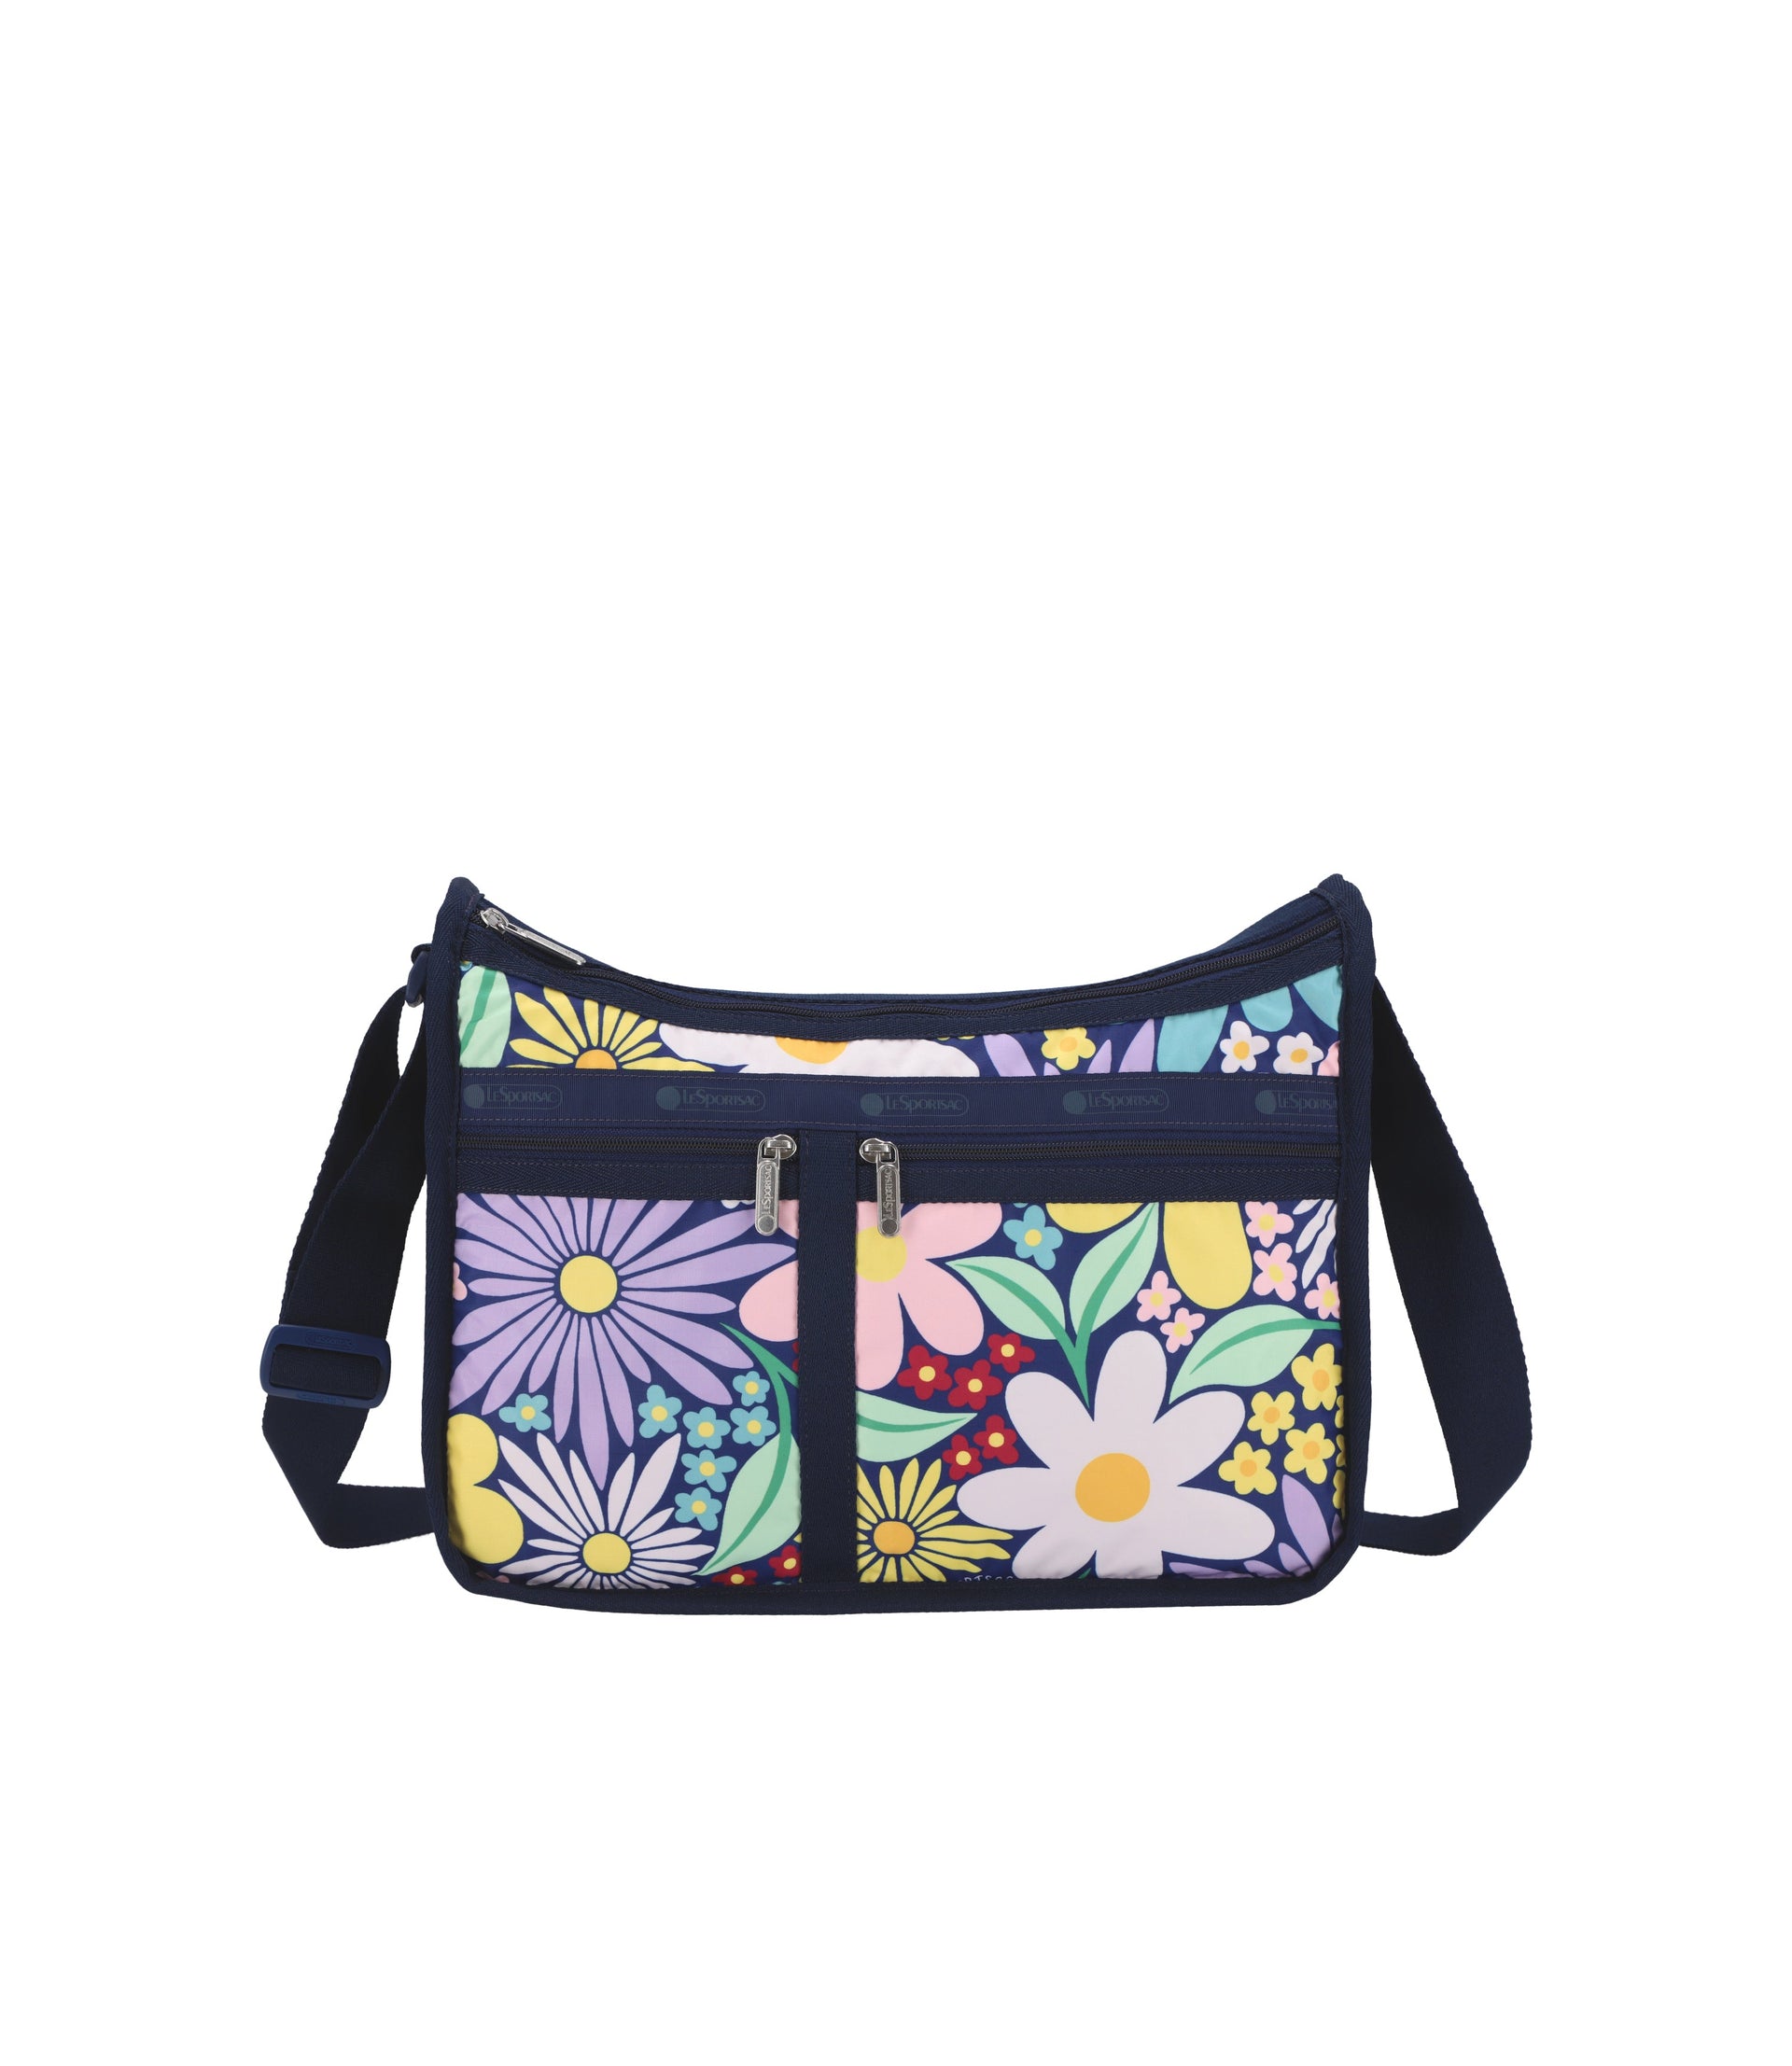 Lesportsac Deluxe Easy Carry Tote - Flower Pop Print